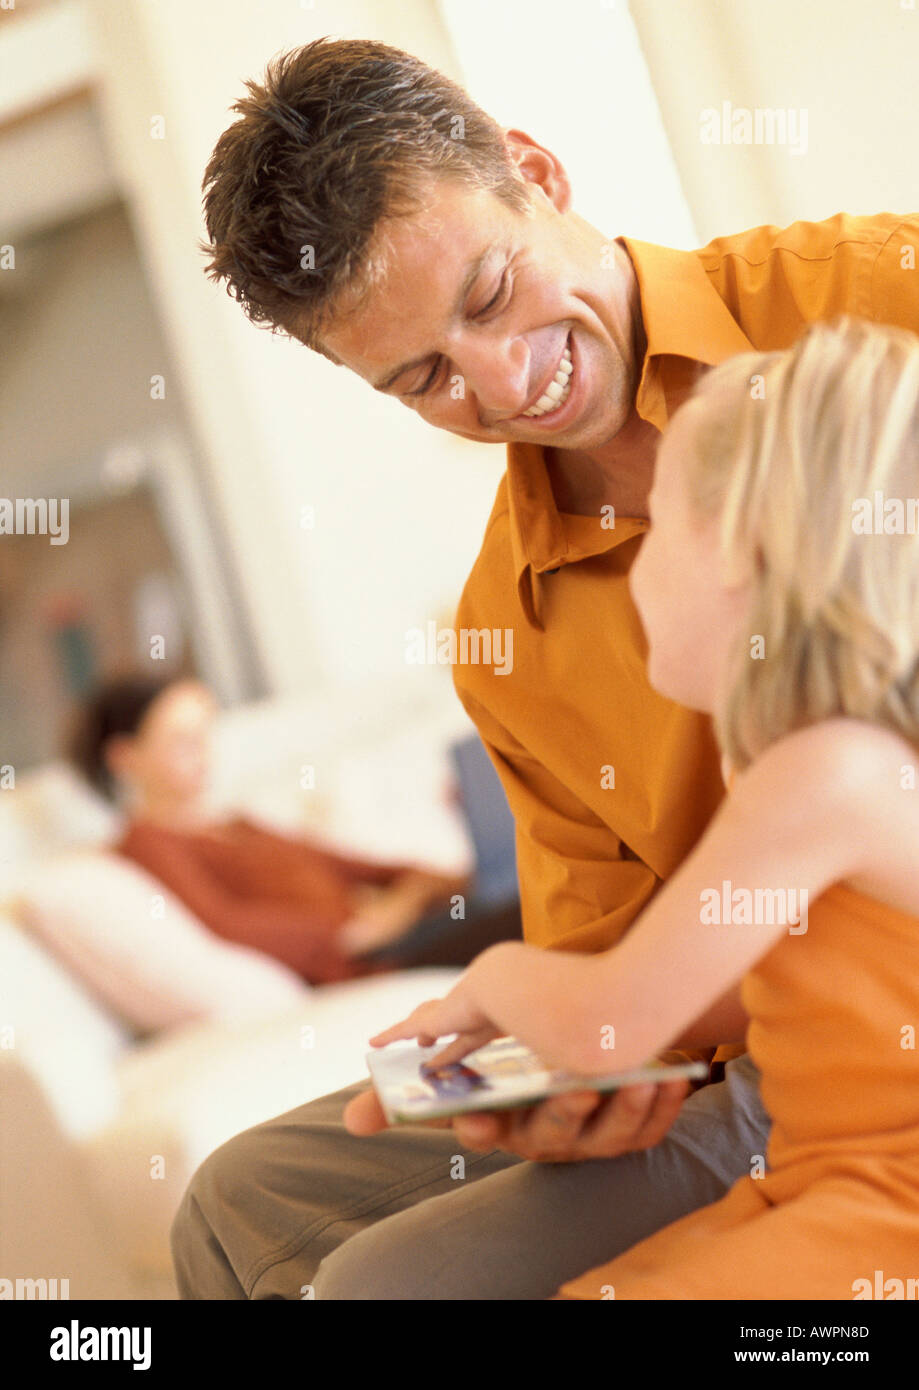 Father and daughter looking at book, smiling, woman sitting on sofa in background Stock Photo